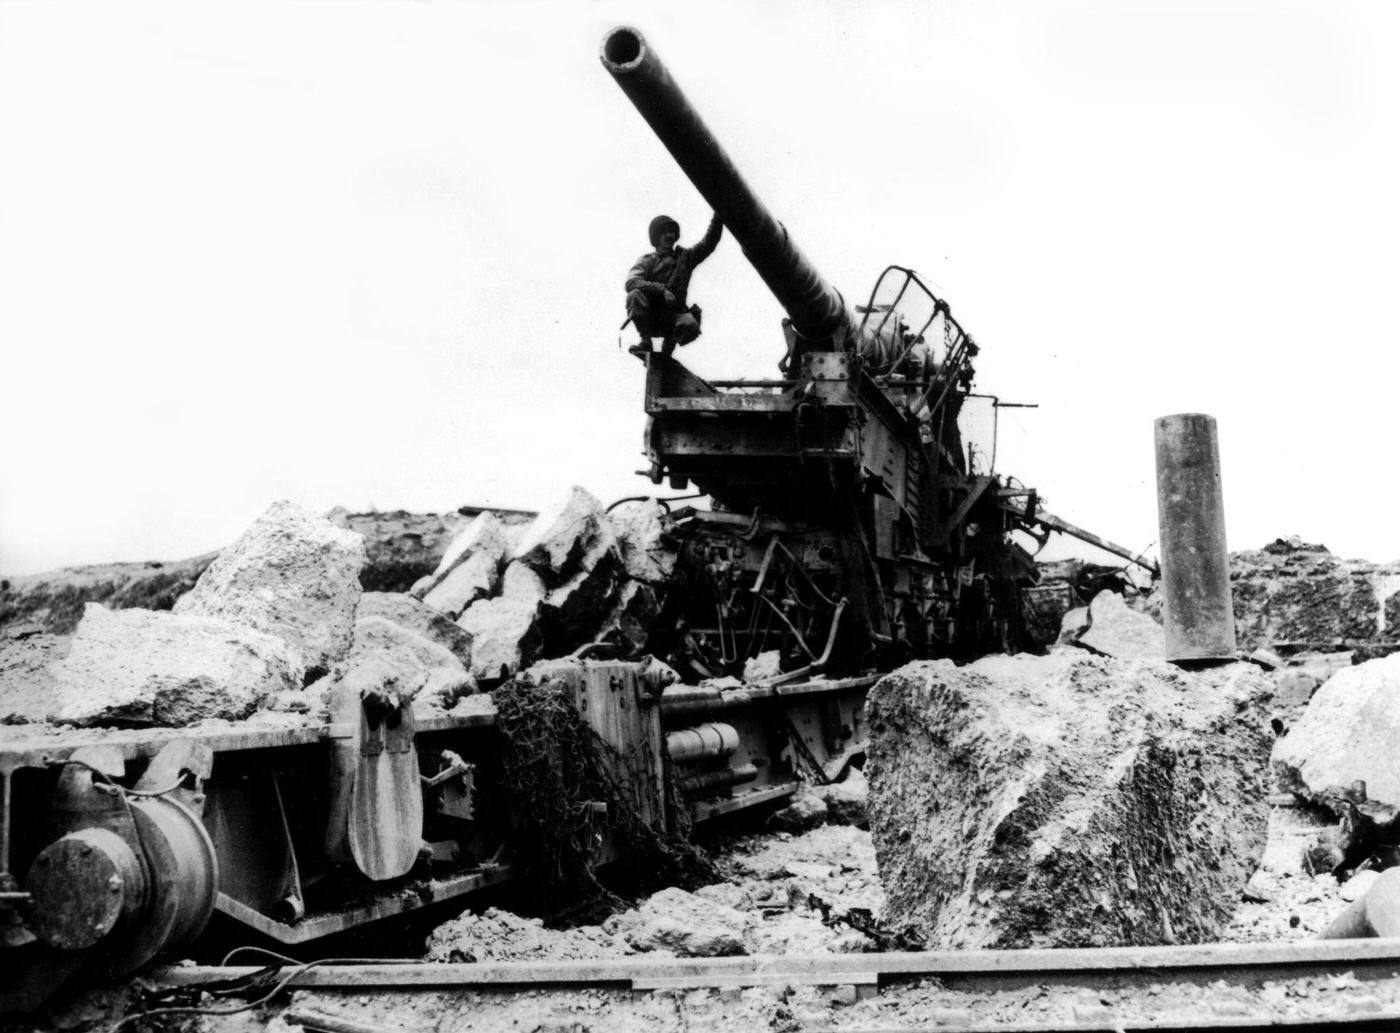 An American soldier examining a giant 10-inch German railroad gun mounted on a circular track in the Cherbourg Peninsula, France.